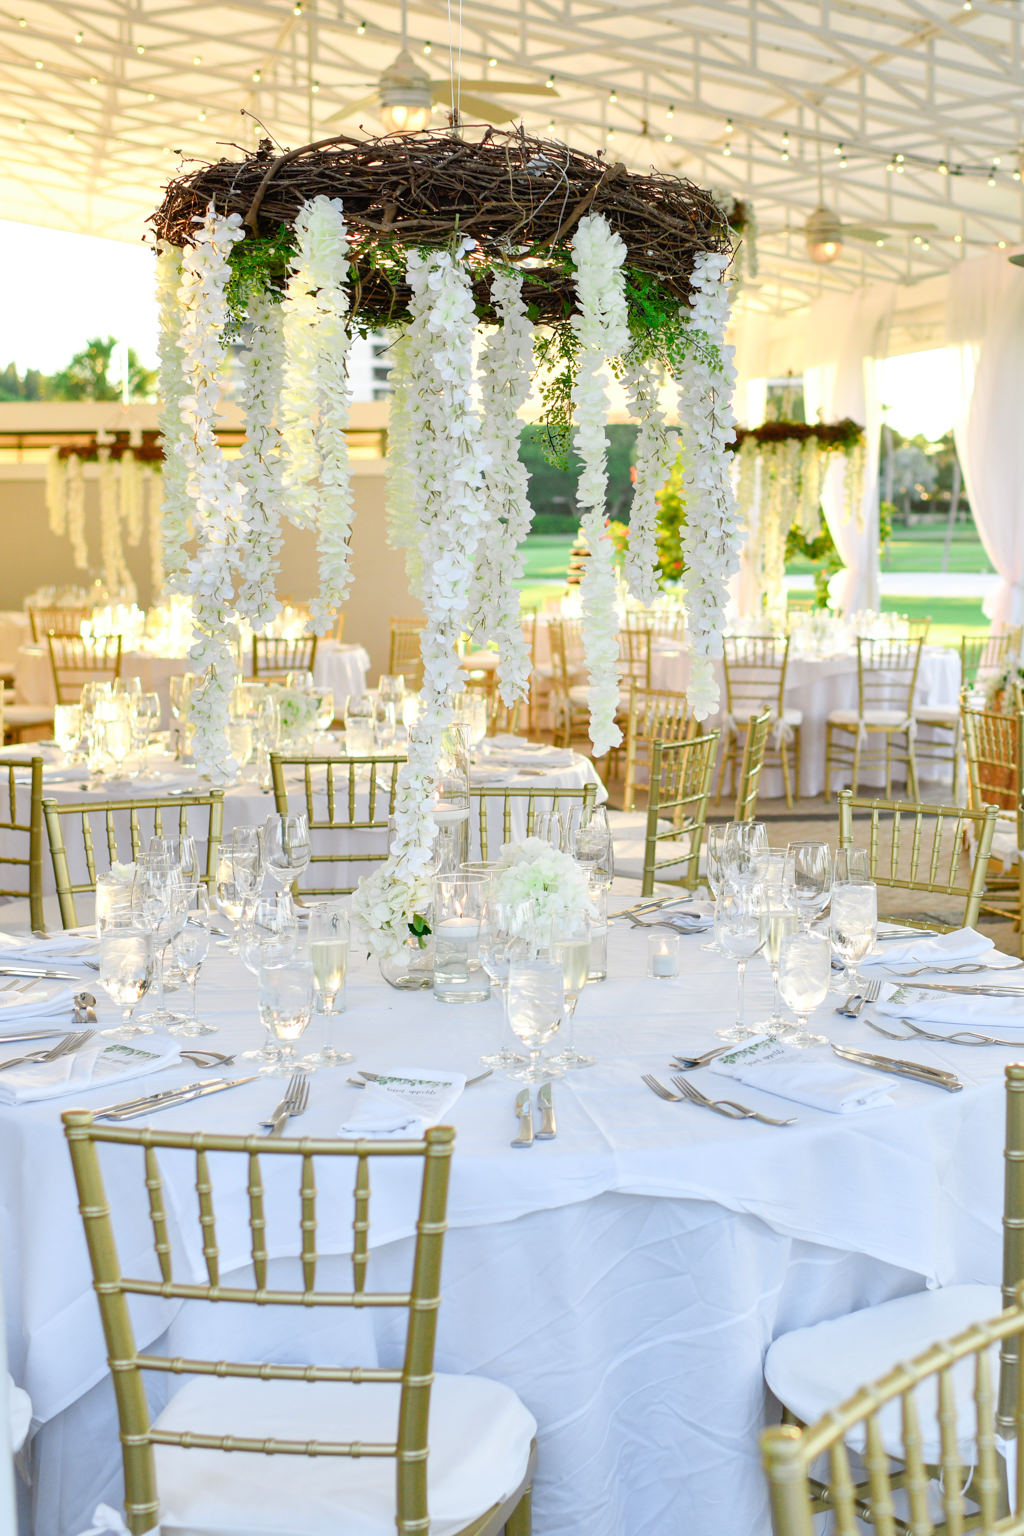 Tropical Classic Elegant Wedding Reception Decor, Round Tables with White Tablecloths, Gold Chiavari Chairs, Low White Floral Centerpieces, Hanging Wooden Branch Wreath with White Wisteria Flowers | Sarasota Wedding Venue The Resort at Longboat Key Club